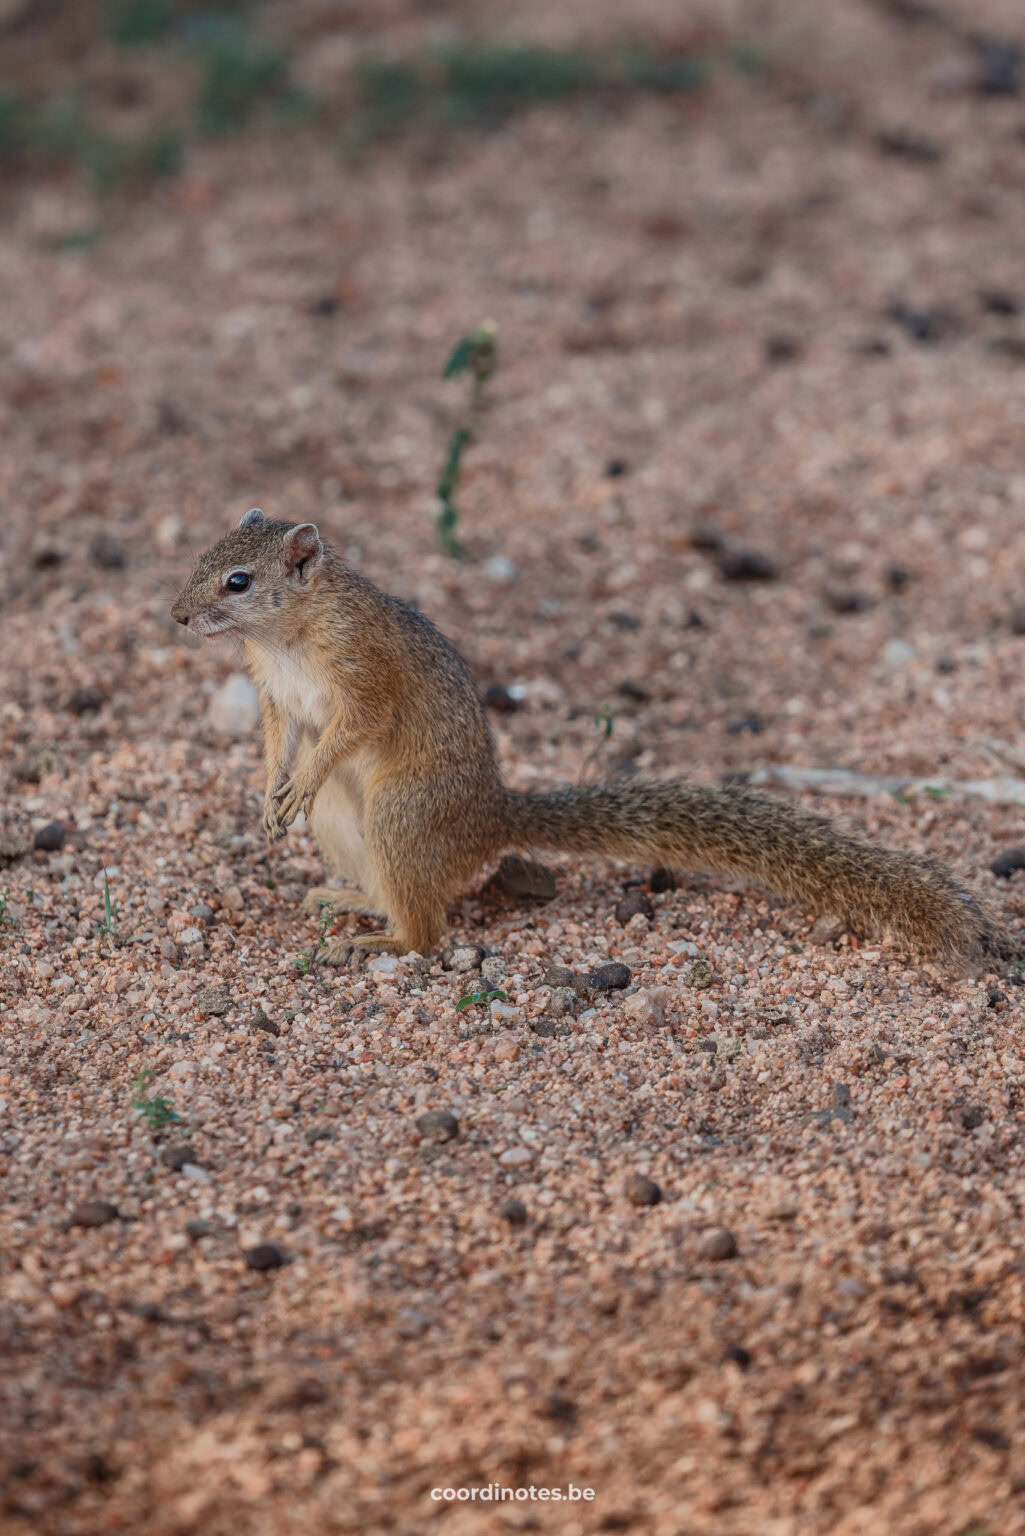 This little squirrel can also be seen in Kruger